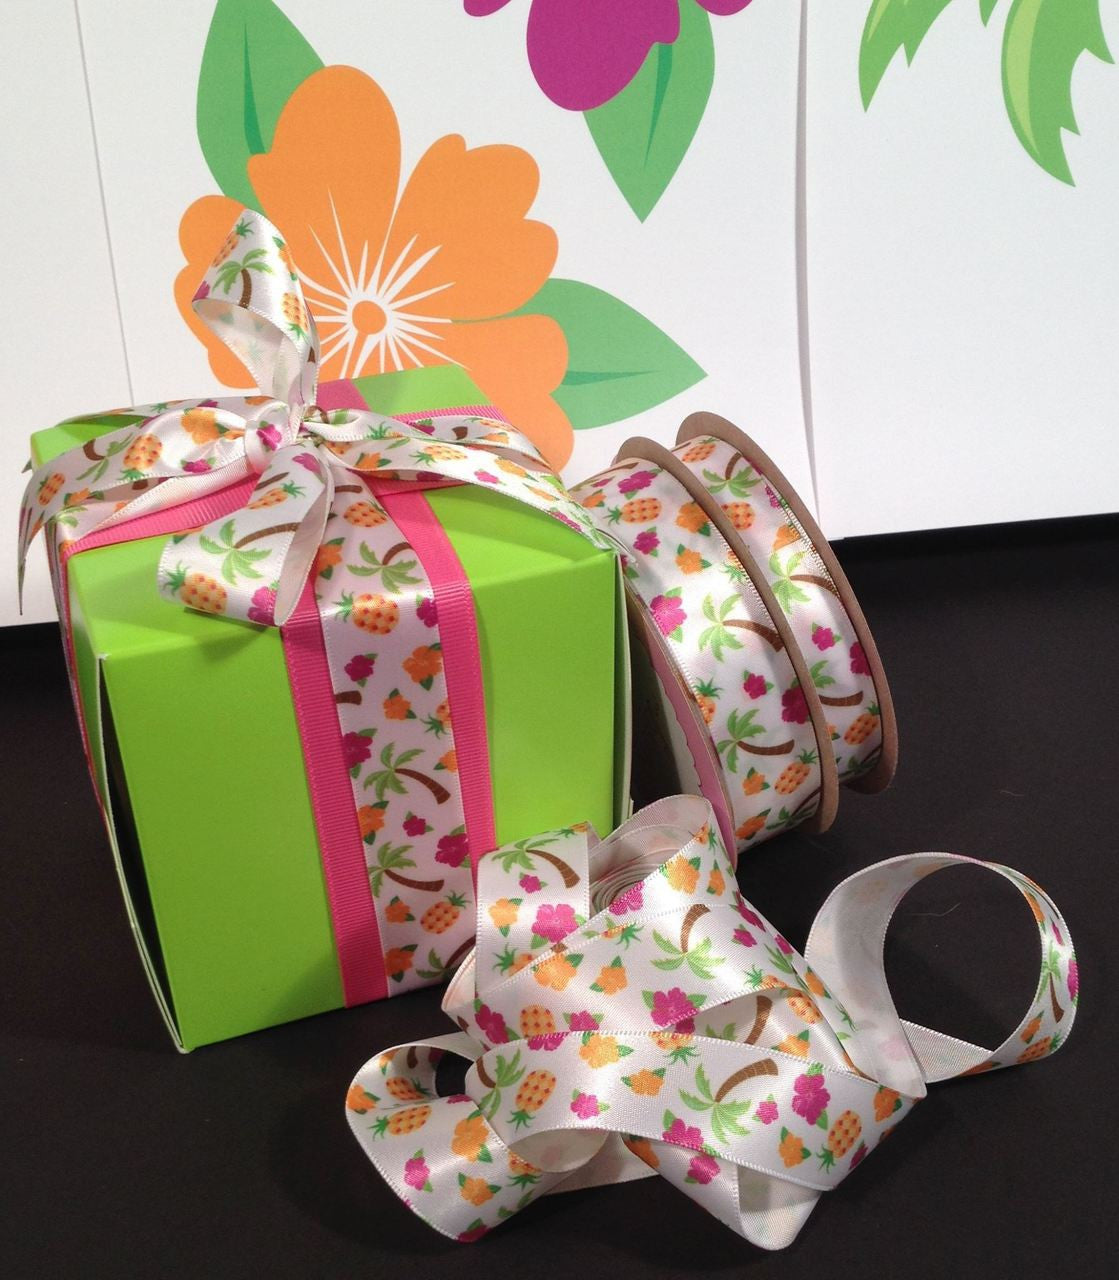 A pretty package always adds to the decor. The hawaiian theme is carried out tin the favor boxes beautifully with our ribbon!